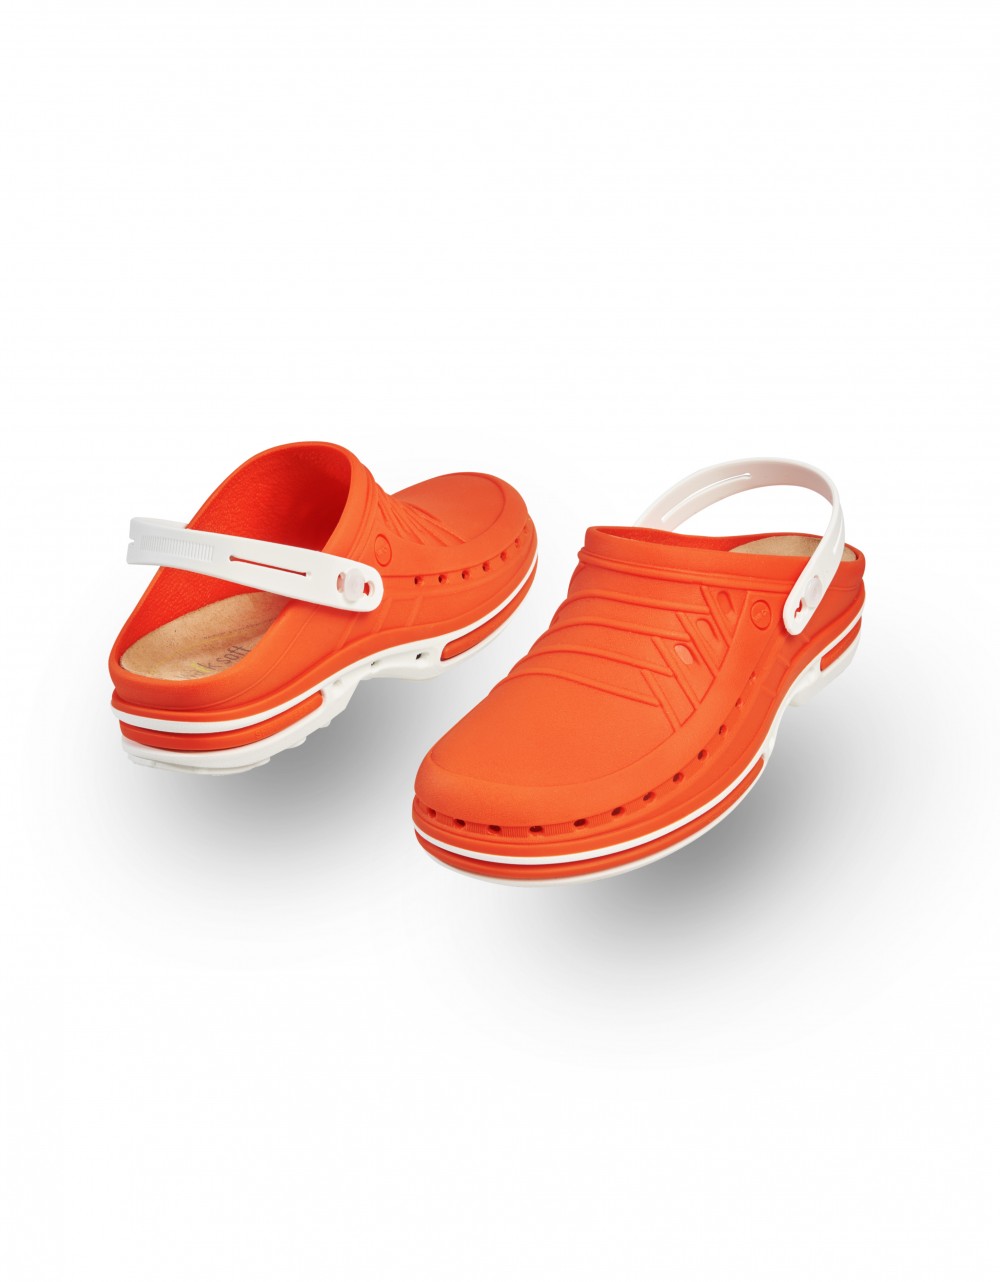 Shoes > Clog Walksoft w/heel strap - Walksoft insole  Sterilizable and machine washable unisex clogs with antislip sole. This product is antistatic and has a removable insole. Ideal for professionals who spend many hours on their feet. 